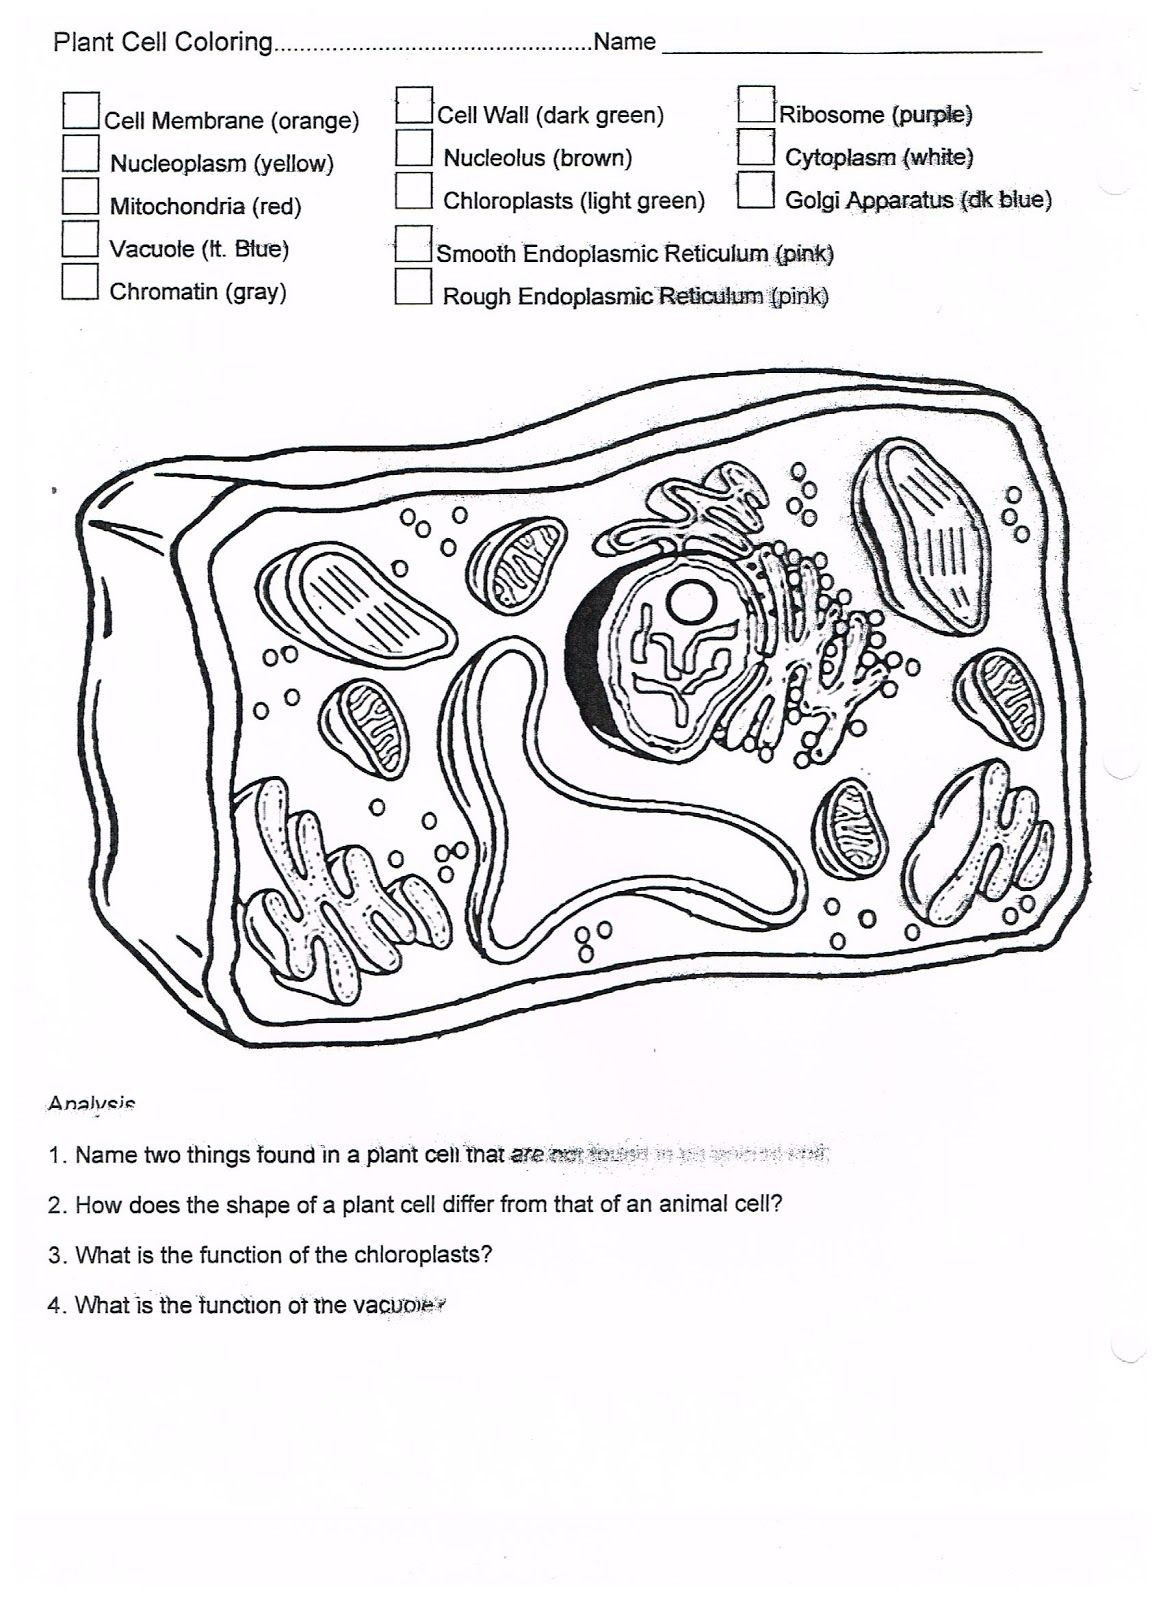 Plant Cell Coloring Worksheet Coloring Animal Cell Coloring Sheet Coloring Pages